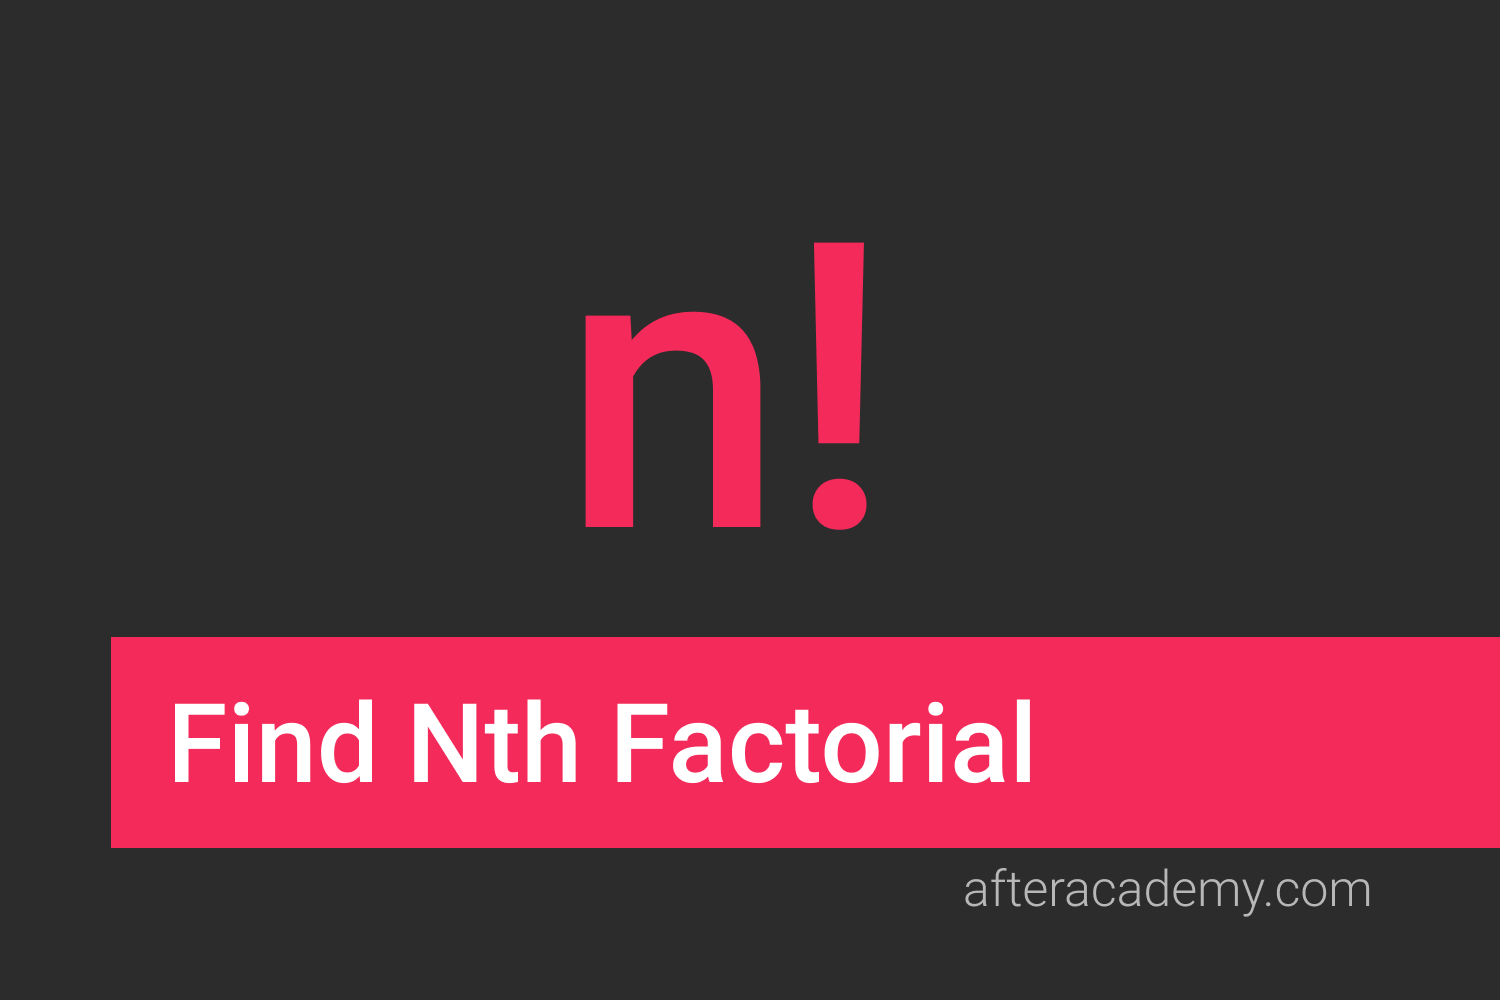 Find Nth Factorial